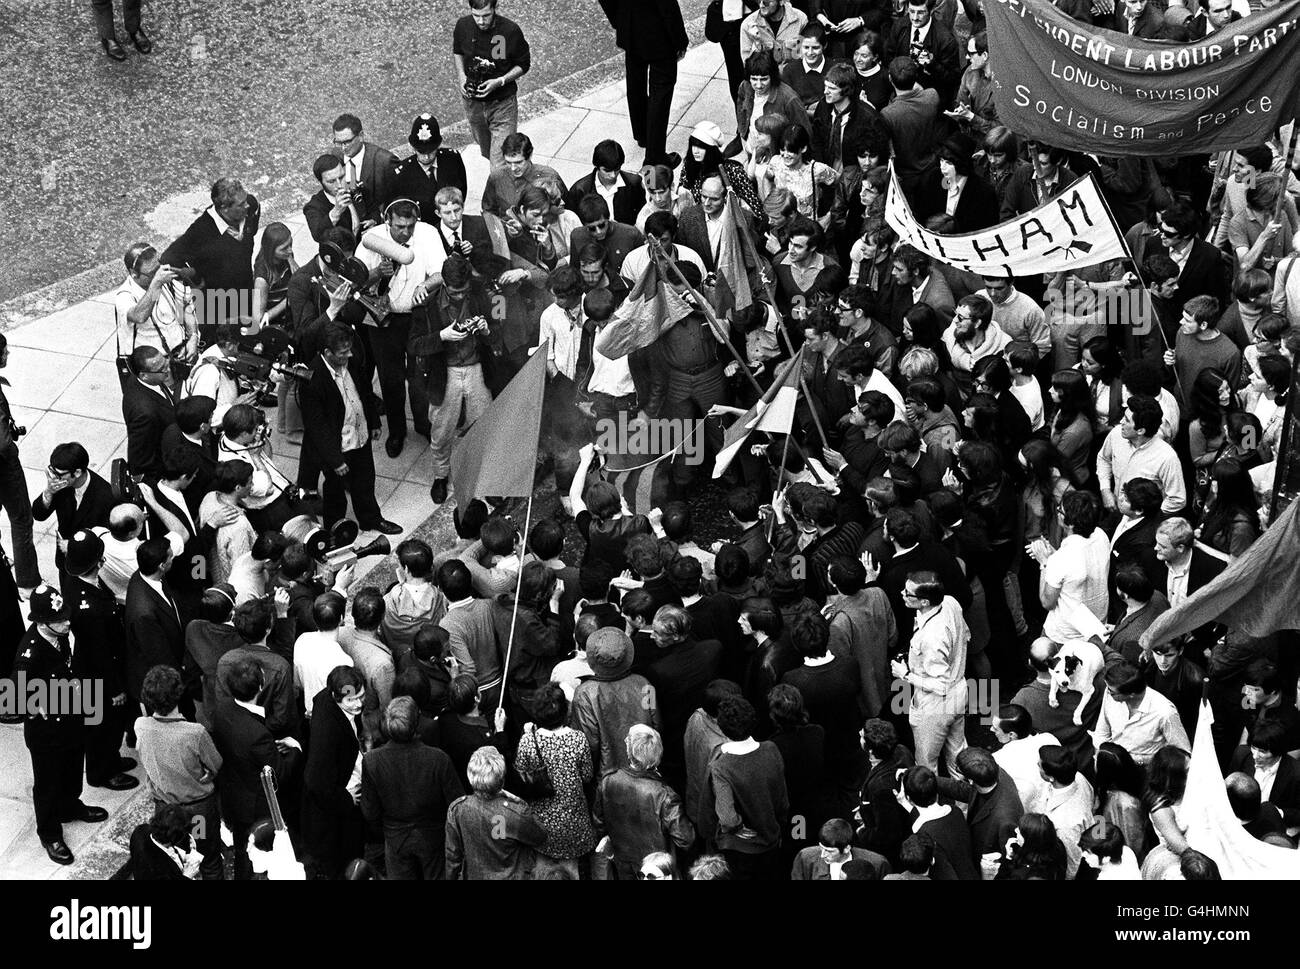 Politics - Anti-Vietnam Protests - Grosvenor Square, London. A flag is burnt by protesters in Grosvenor Square, London, during a demonstration against the war in Vietnam. Stock Photo